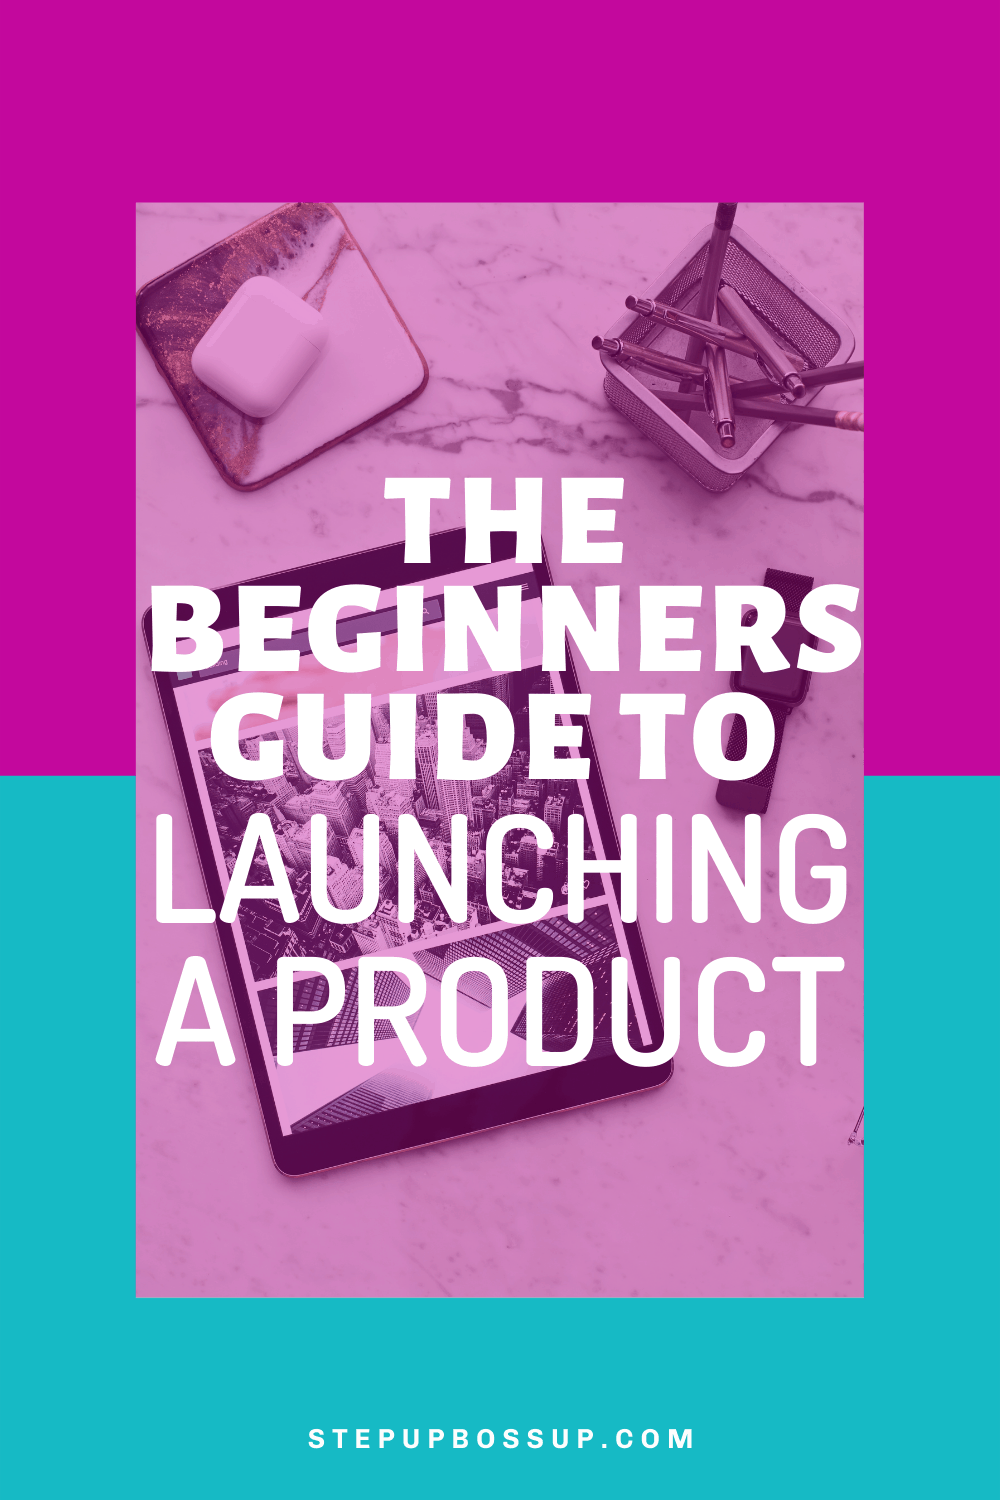 Launching a Product